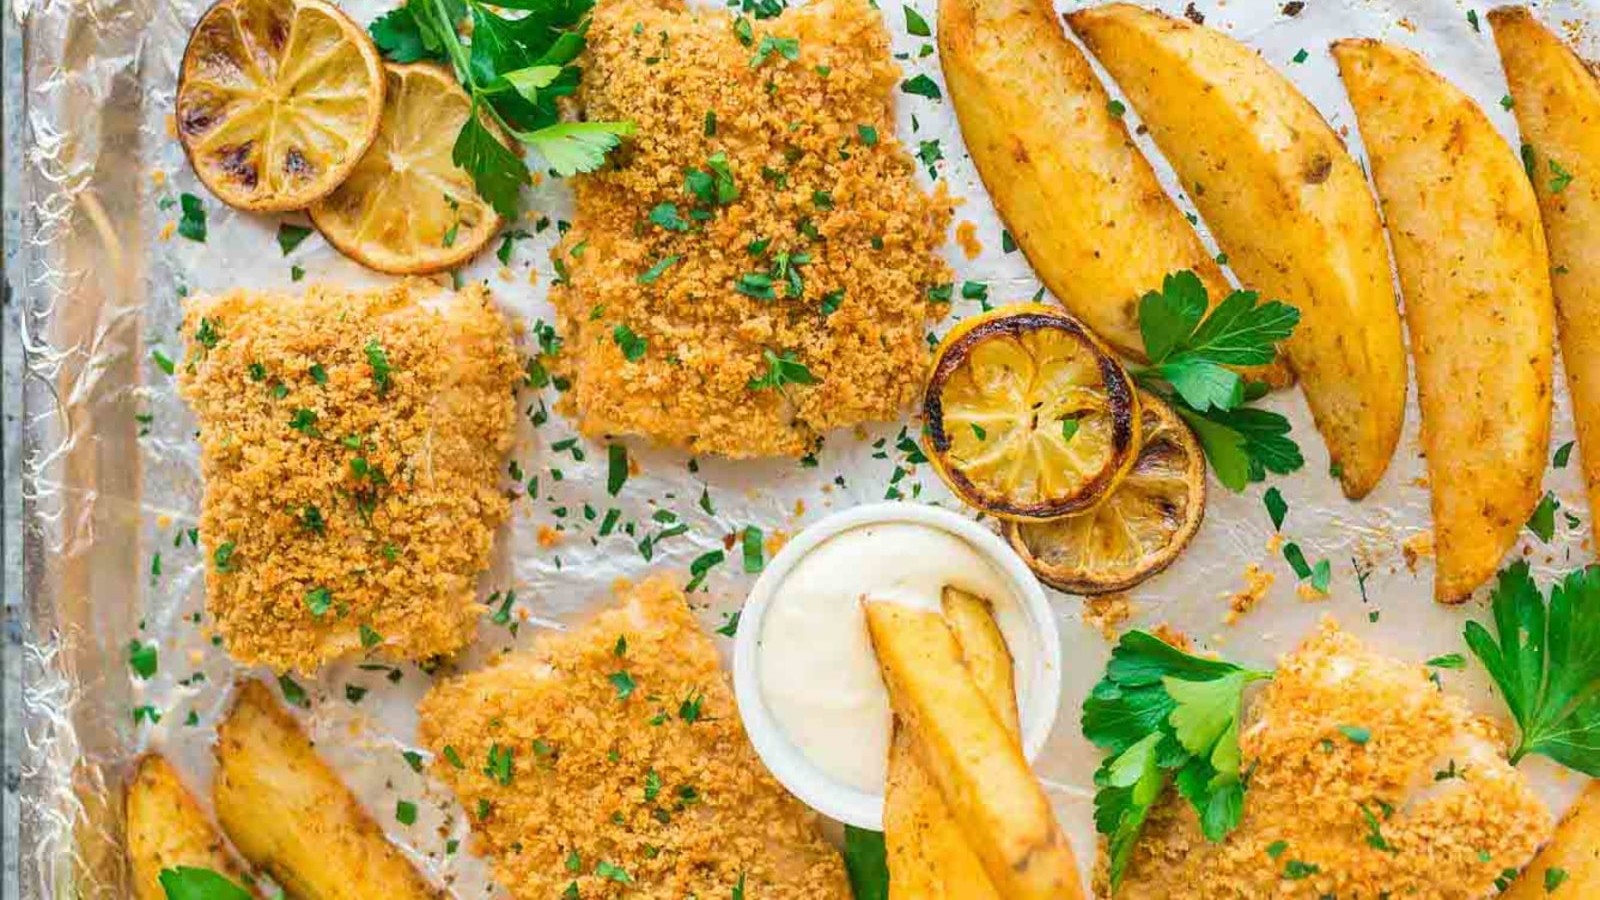 Image of Baked Fish and Chips